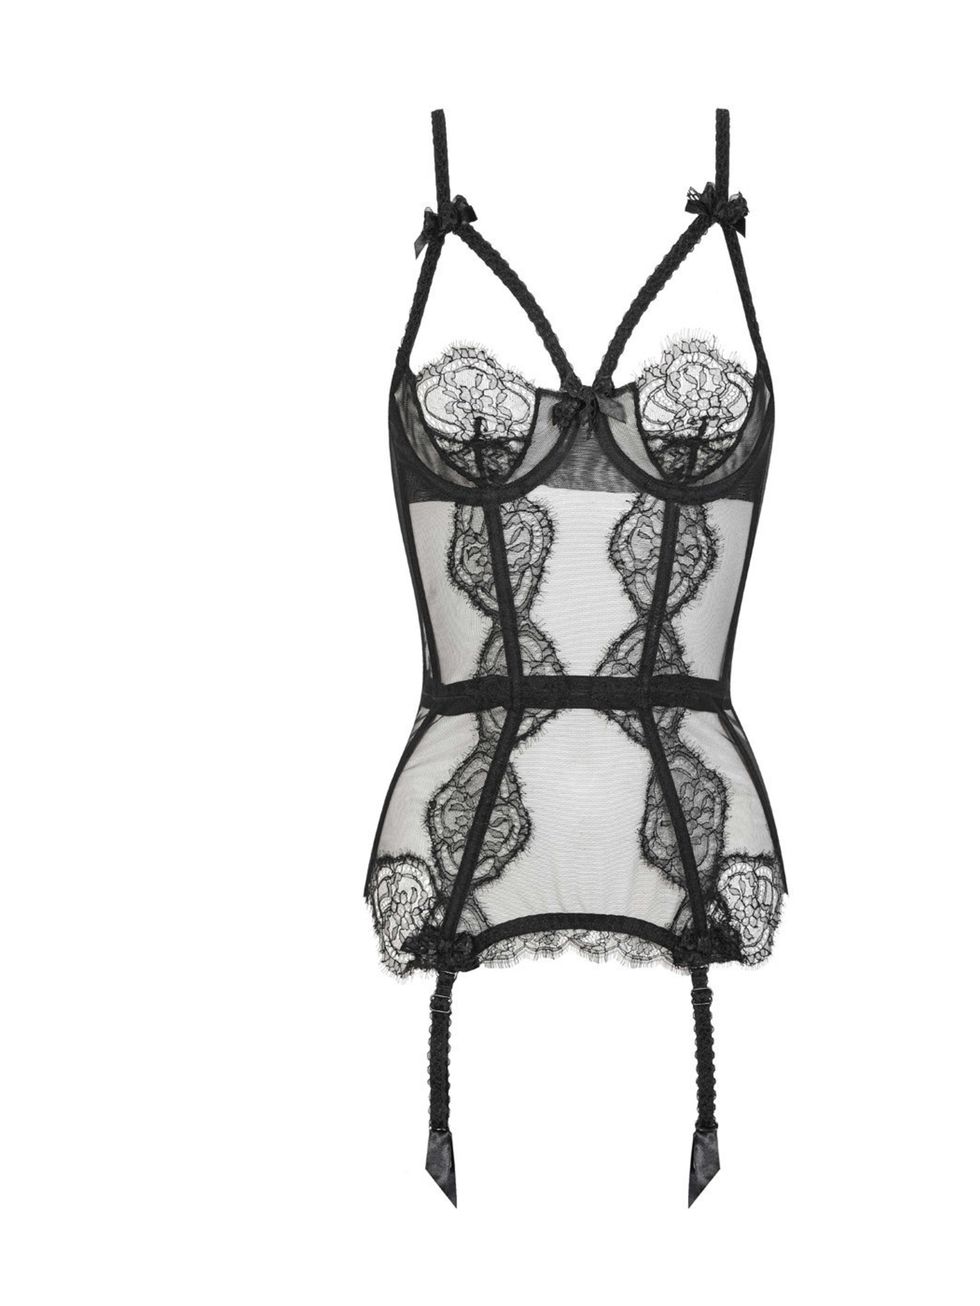 <p>Agent Provocateur 'Alina' basque, £325 at www.agentprovocateur.com</p><p><a href="http://www.agentprovocateur.com/lingerie/corsets-and-basques/info/alina-basque~black">BUY NOW</a></p>